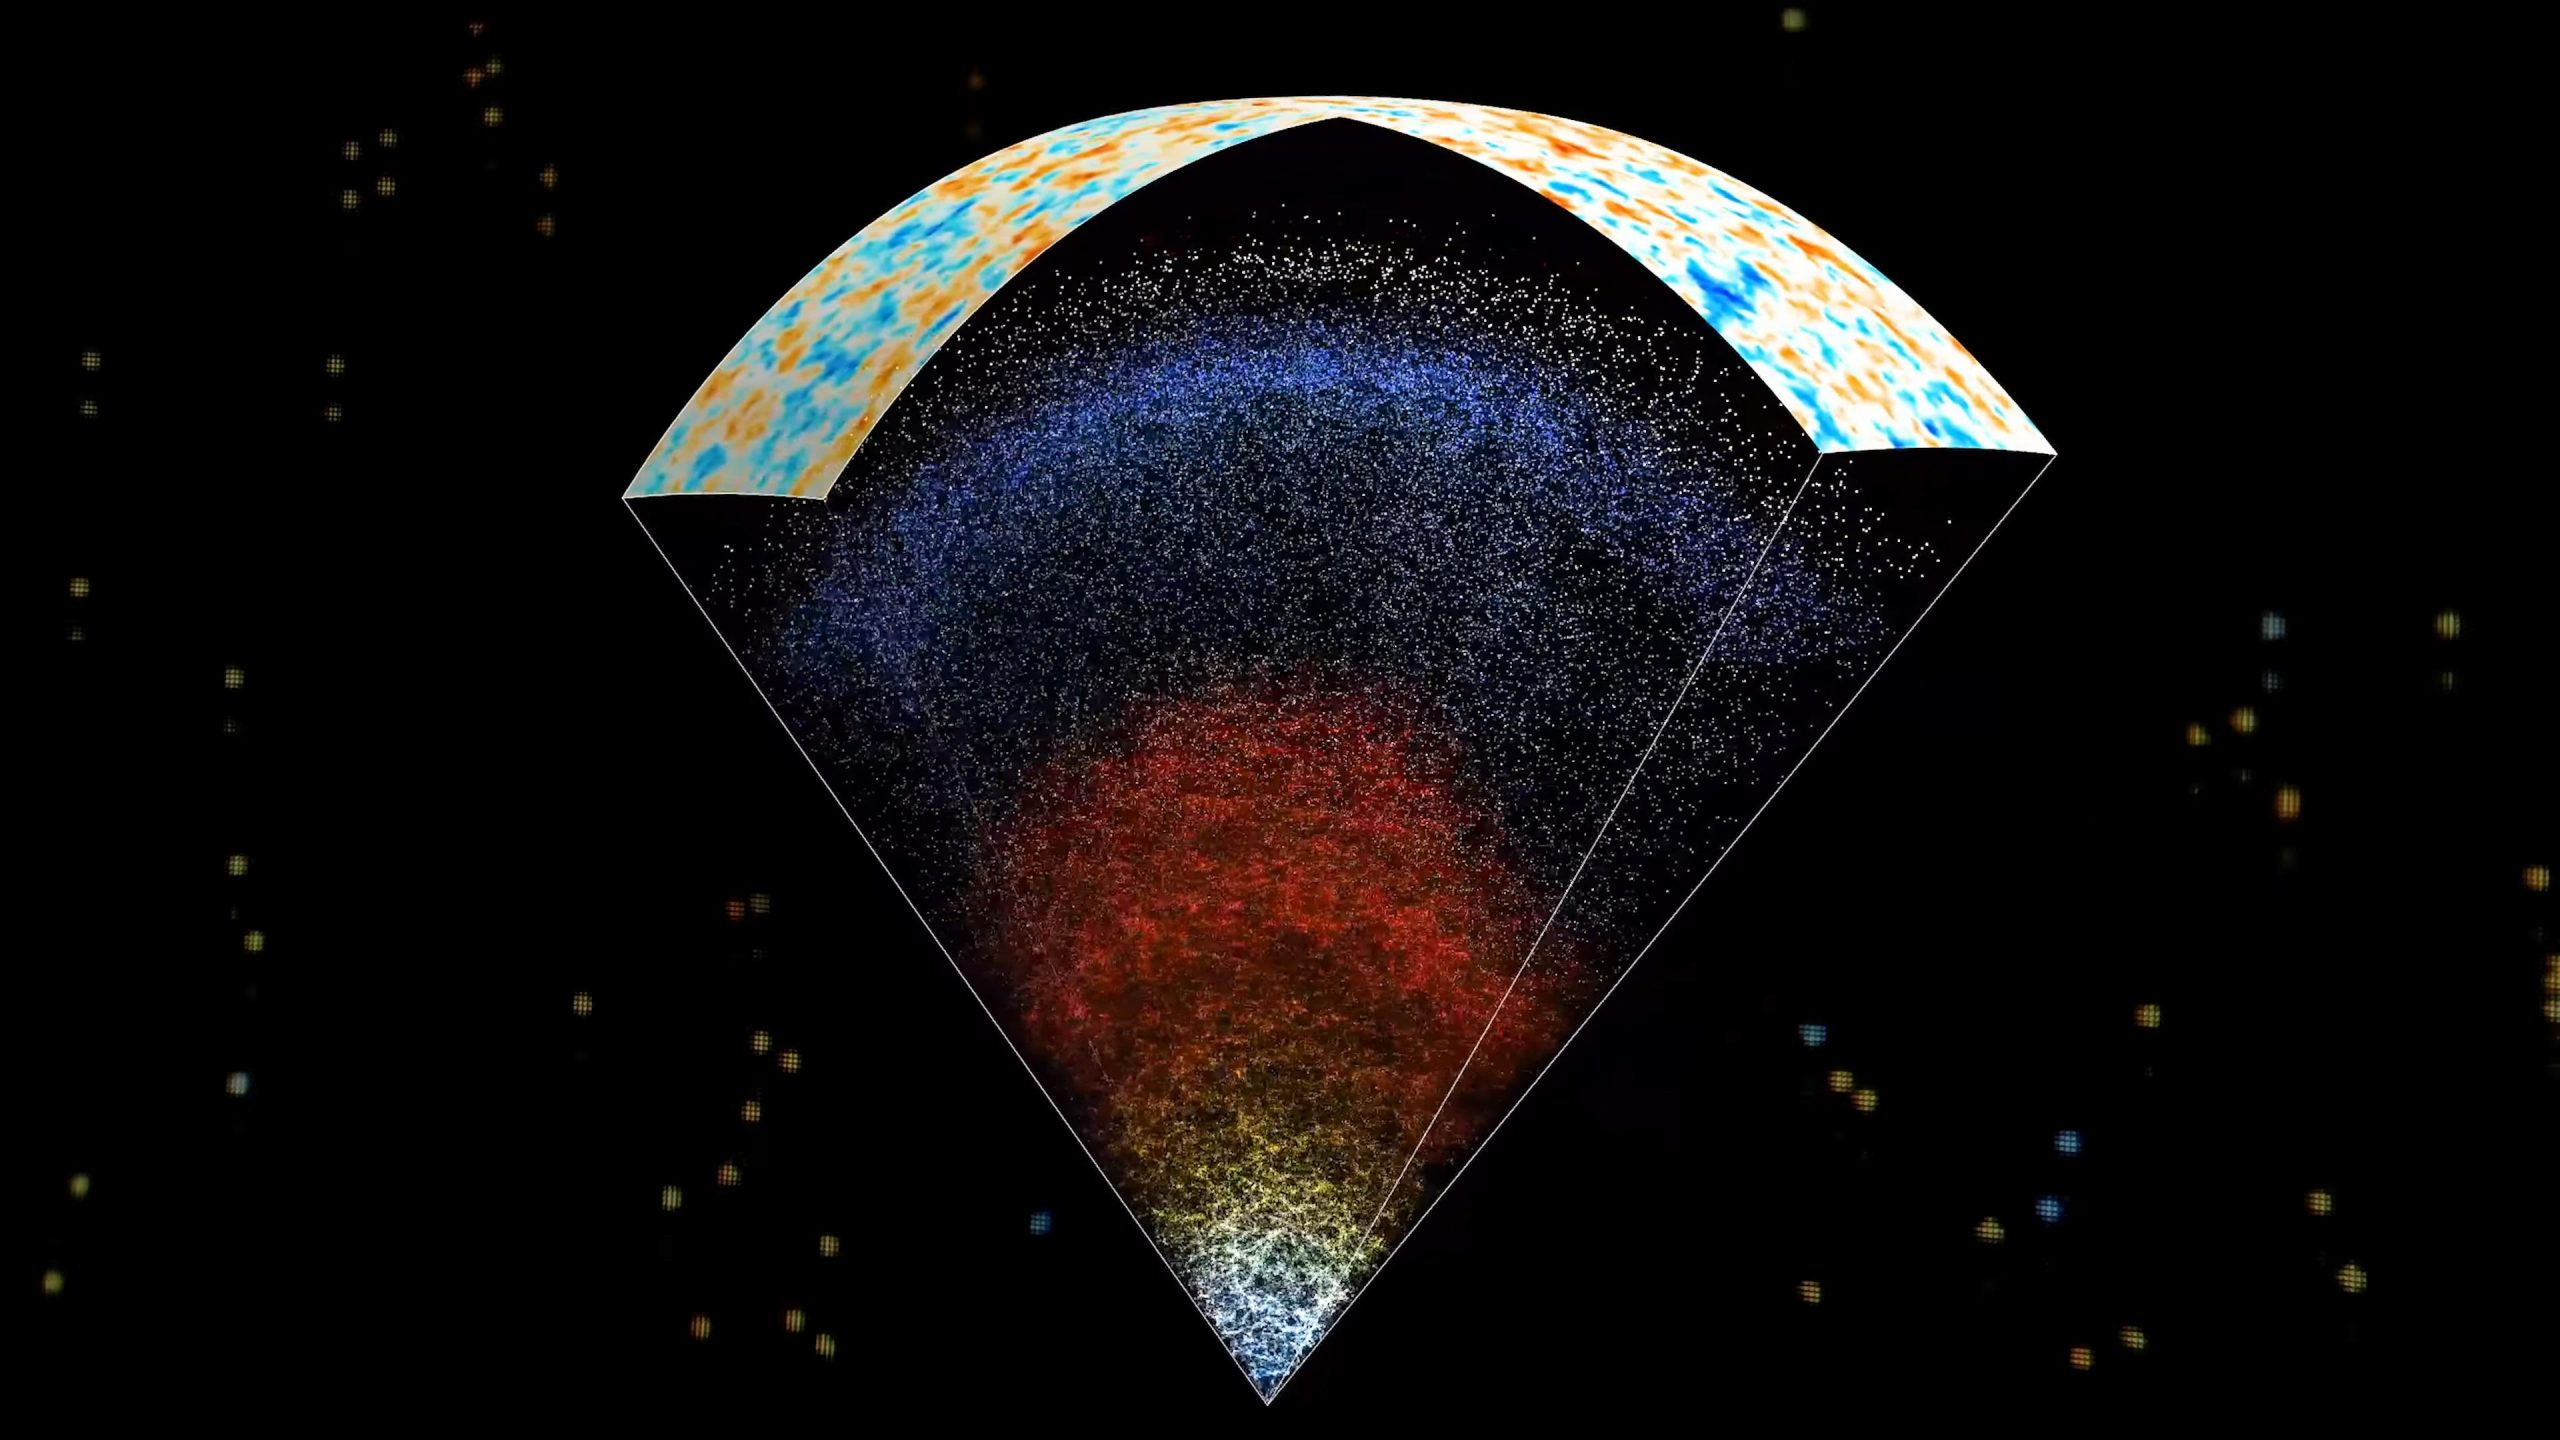 New Map of the Universe Displays Span of Entire Cosmos With Pinpoint Accuracy and Sweeping Beauty – SciTechDaily